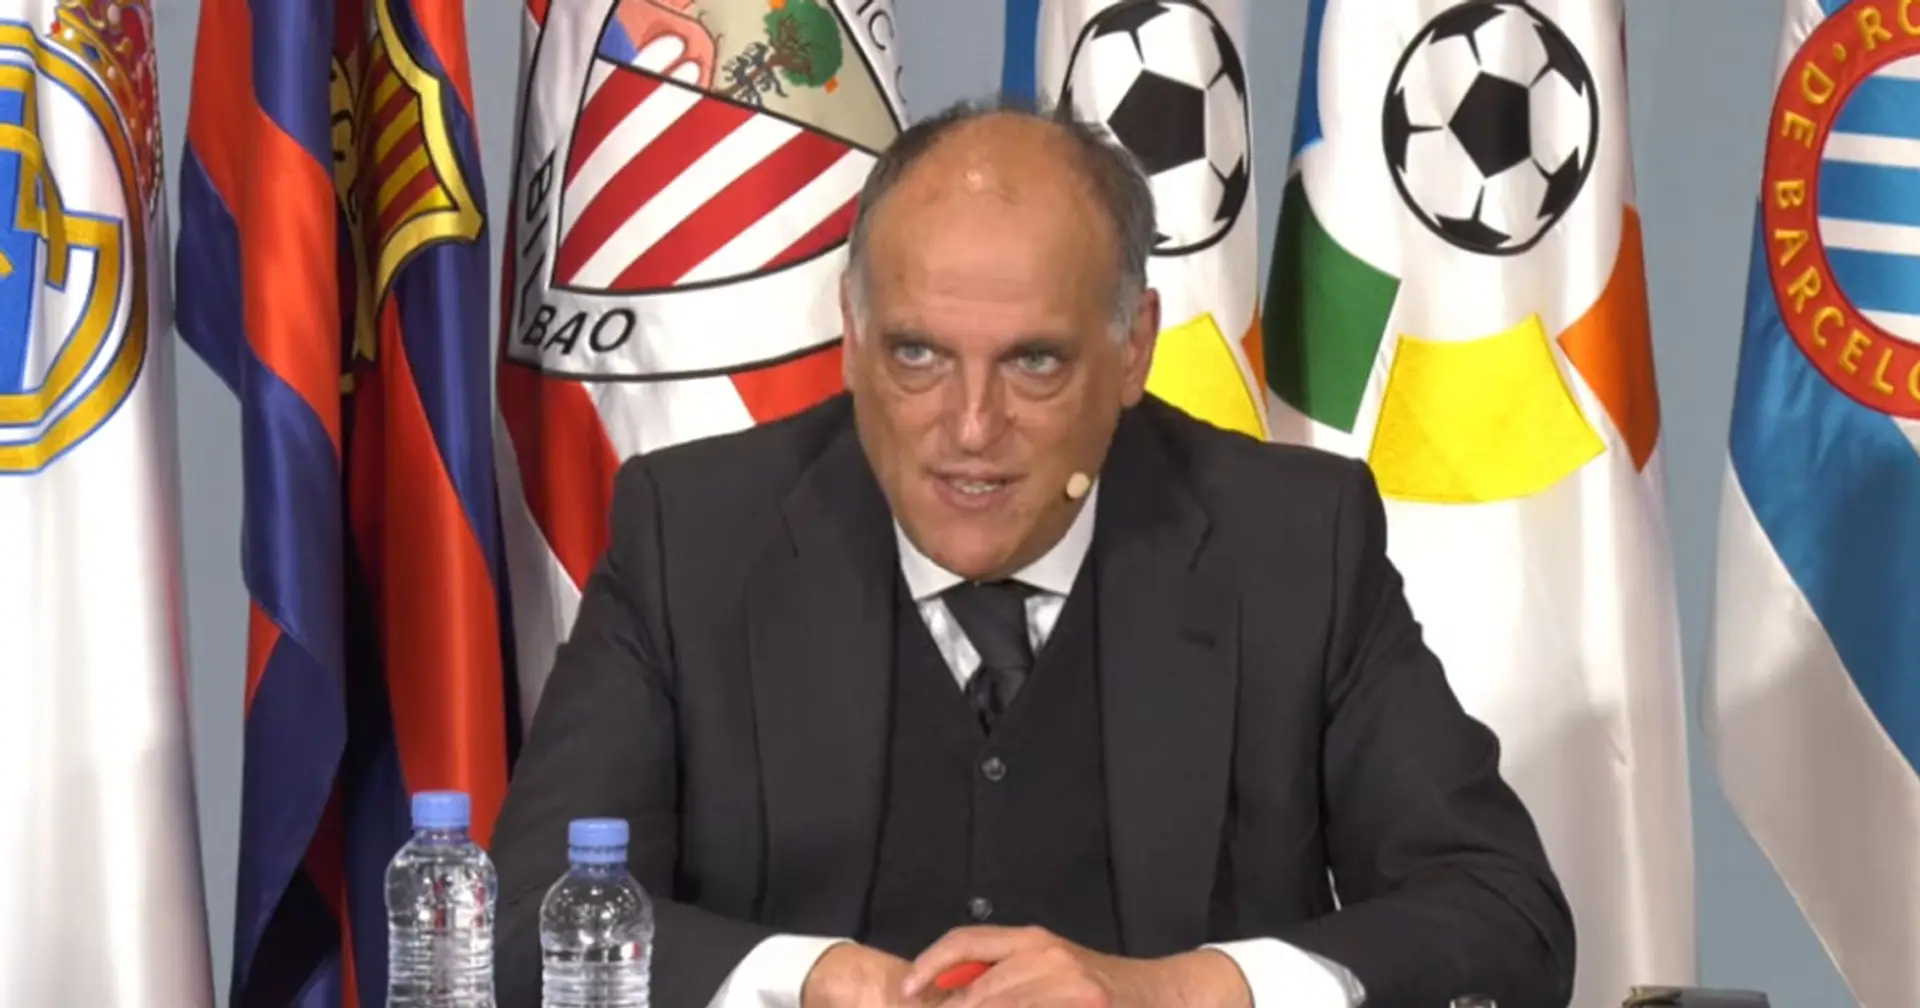 Tebas tweets anti-goal line technology articles after Yamal no-goal decision